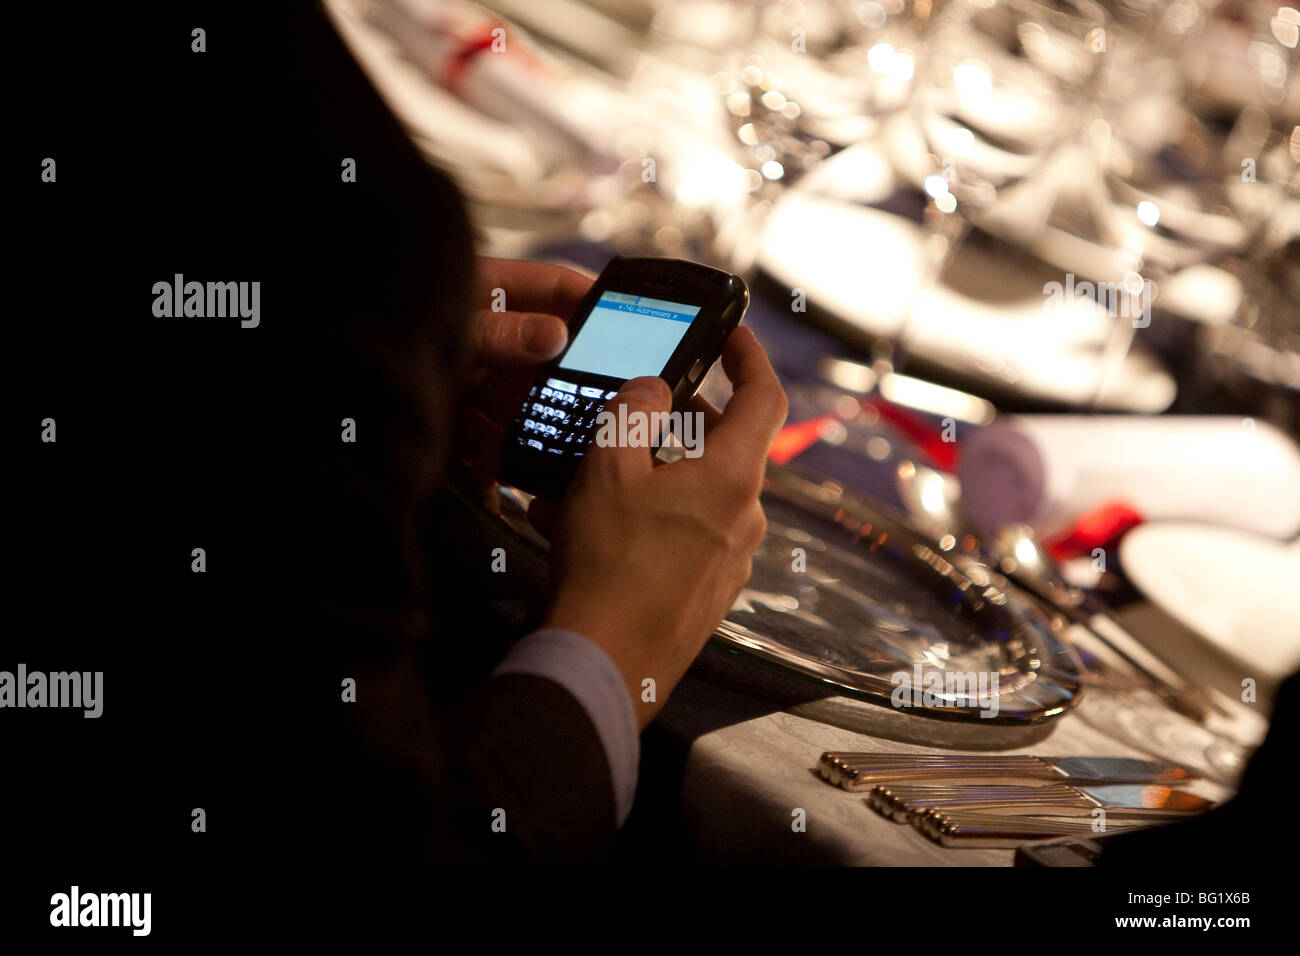 Man using Blackberry whilst at dinner event. Stock Photo